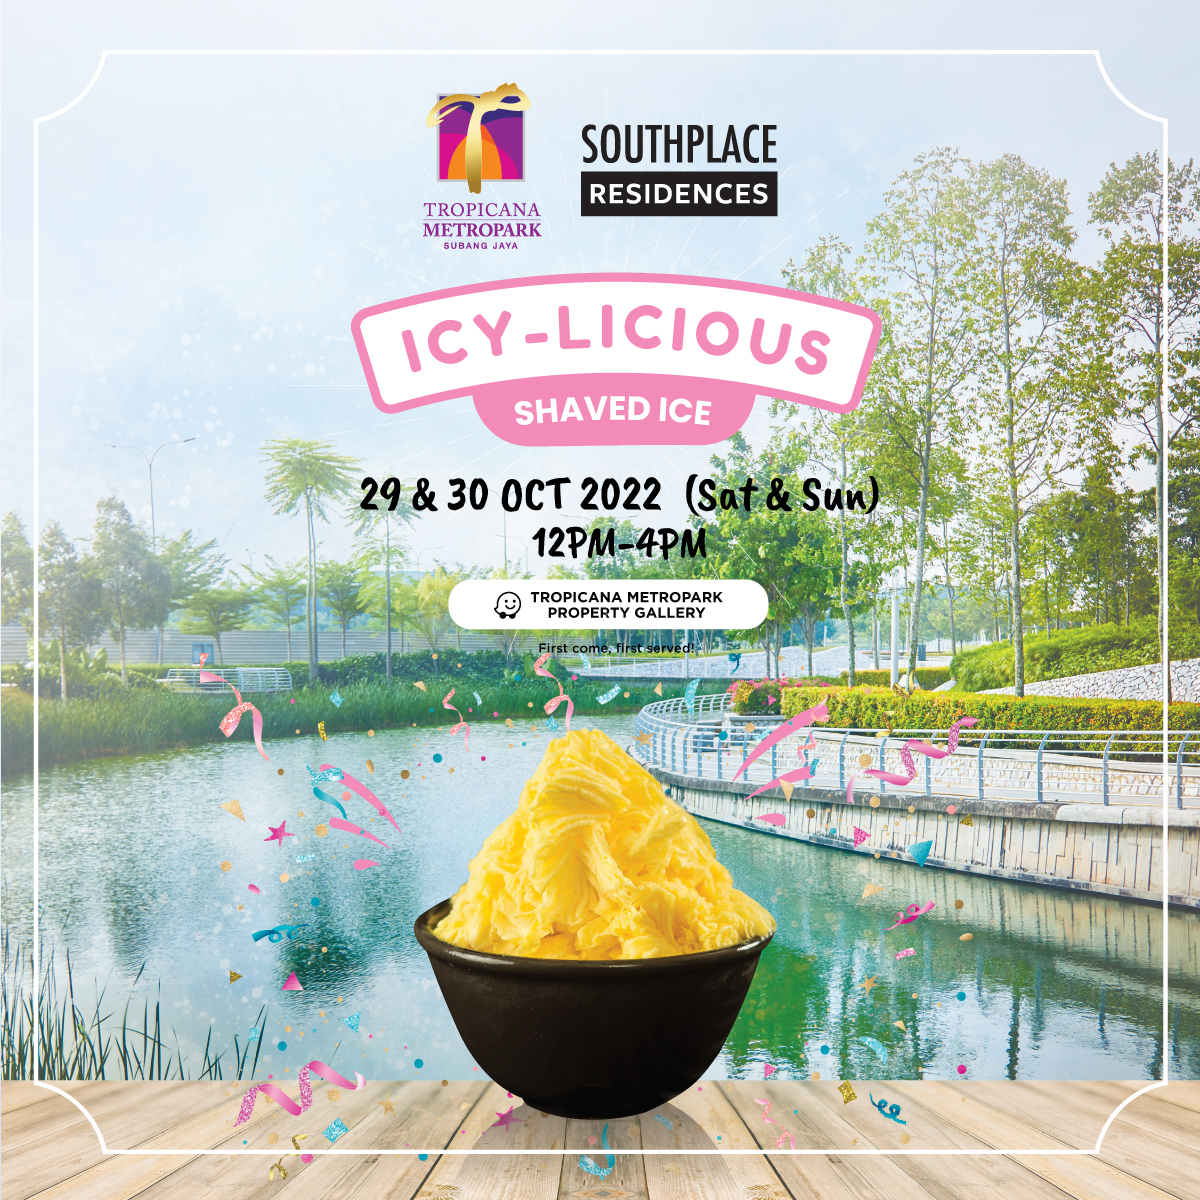 Icy-Licious Shaved Ice @ Tropicana Metropark